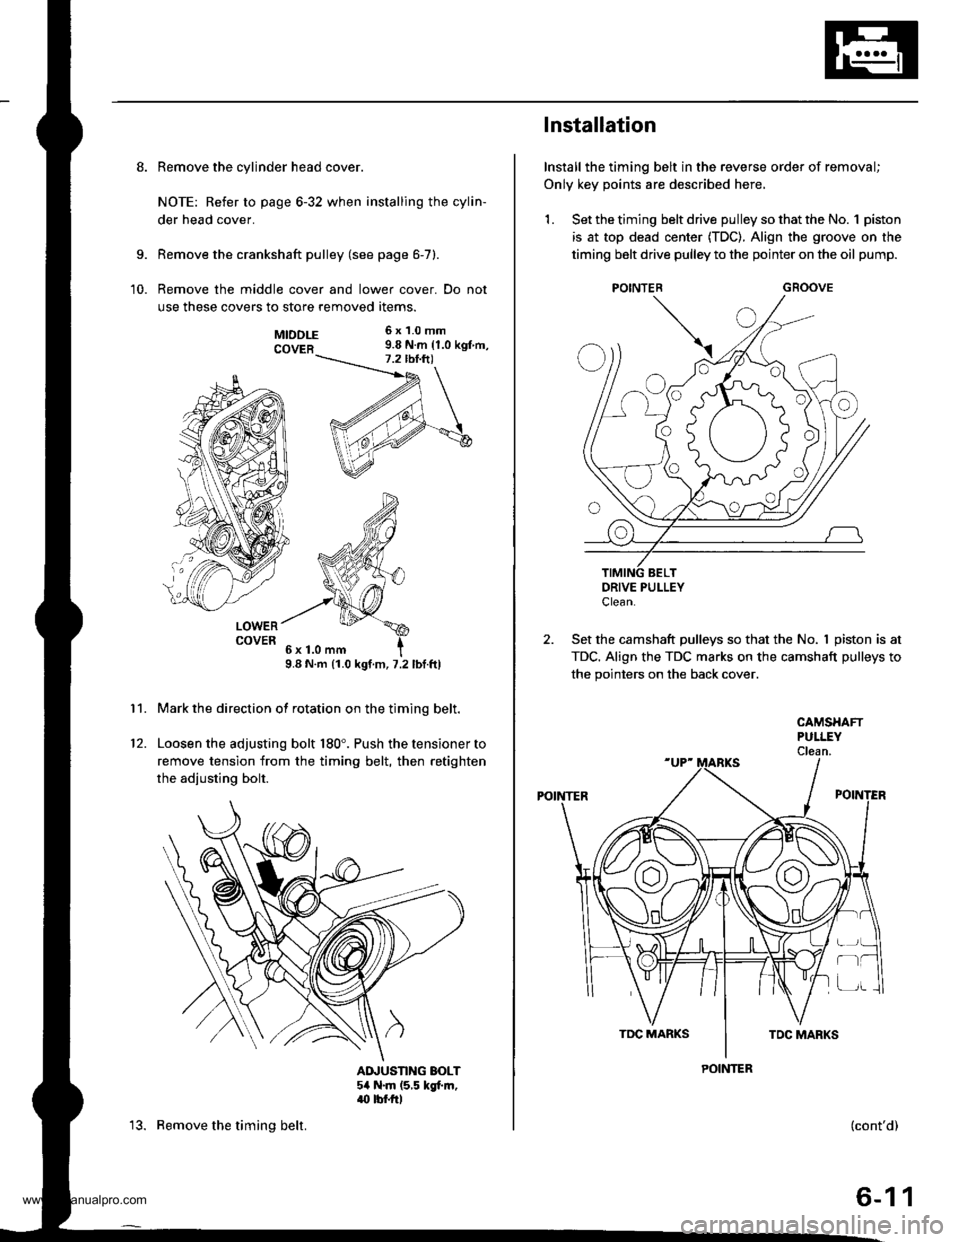 HONDA CR-V 1997 RD1-RD3 / 1.G User Guide 
8. Remove the cylinder head cover.
NOTE: Refer to page 6-32 when installing the cylin-
der head cover.
Remove the crankshaft pulley (see page 6-7).
Remove the middle cover and lower cover. Do not
use